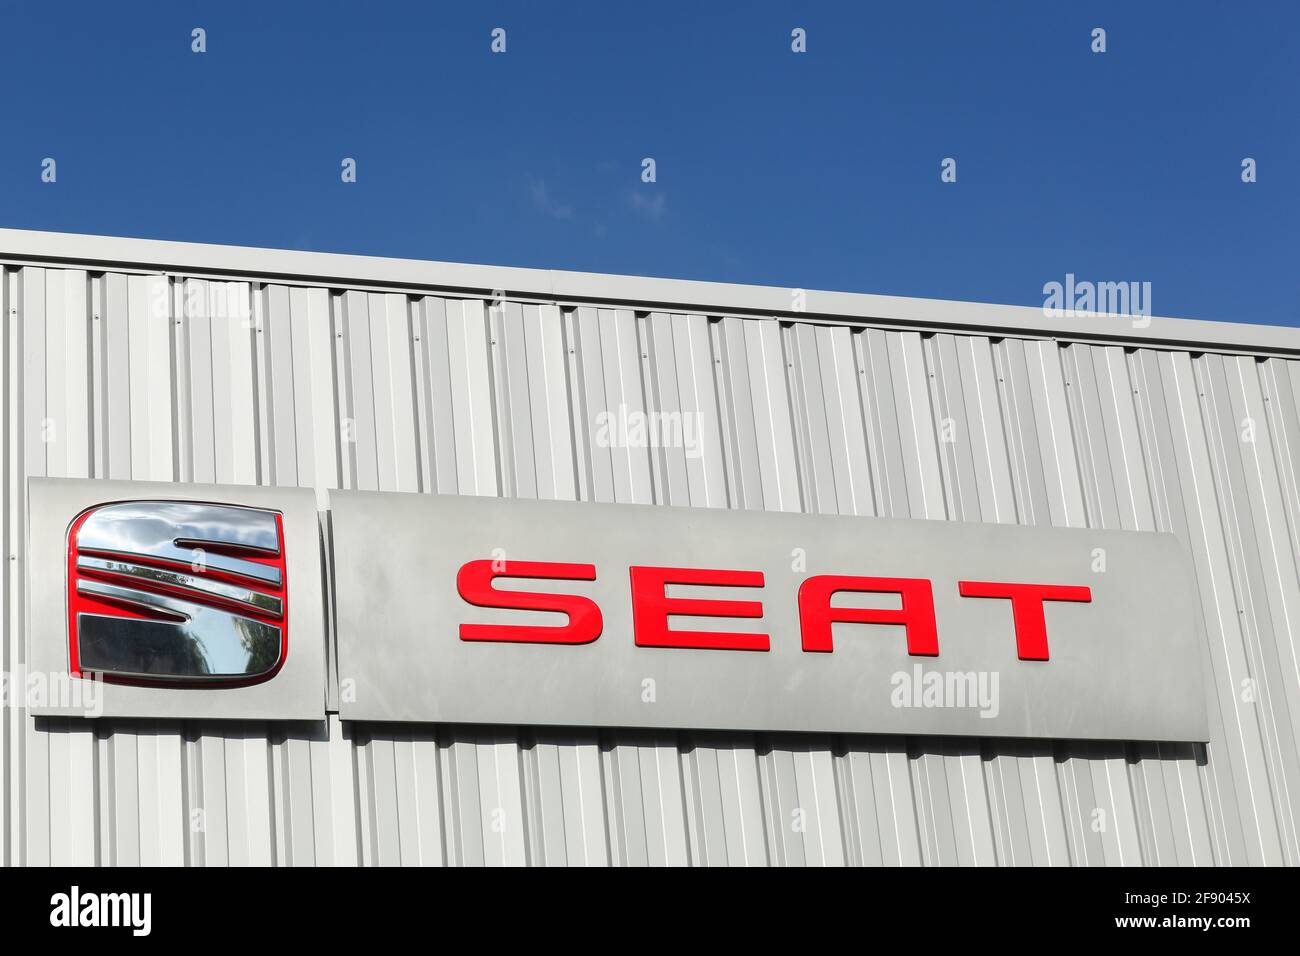 Villefranche, France - September 20, 2015: SEAT is a spanish automobile manufacturer and it is a wholly owned subsidiary of the Volkswagen Group Stock Photo